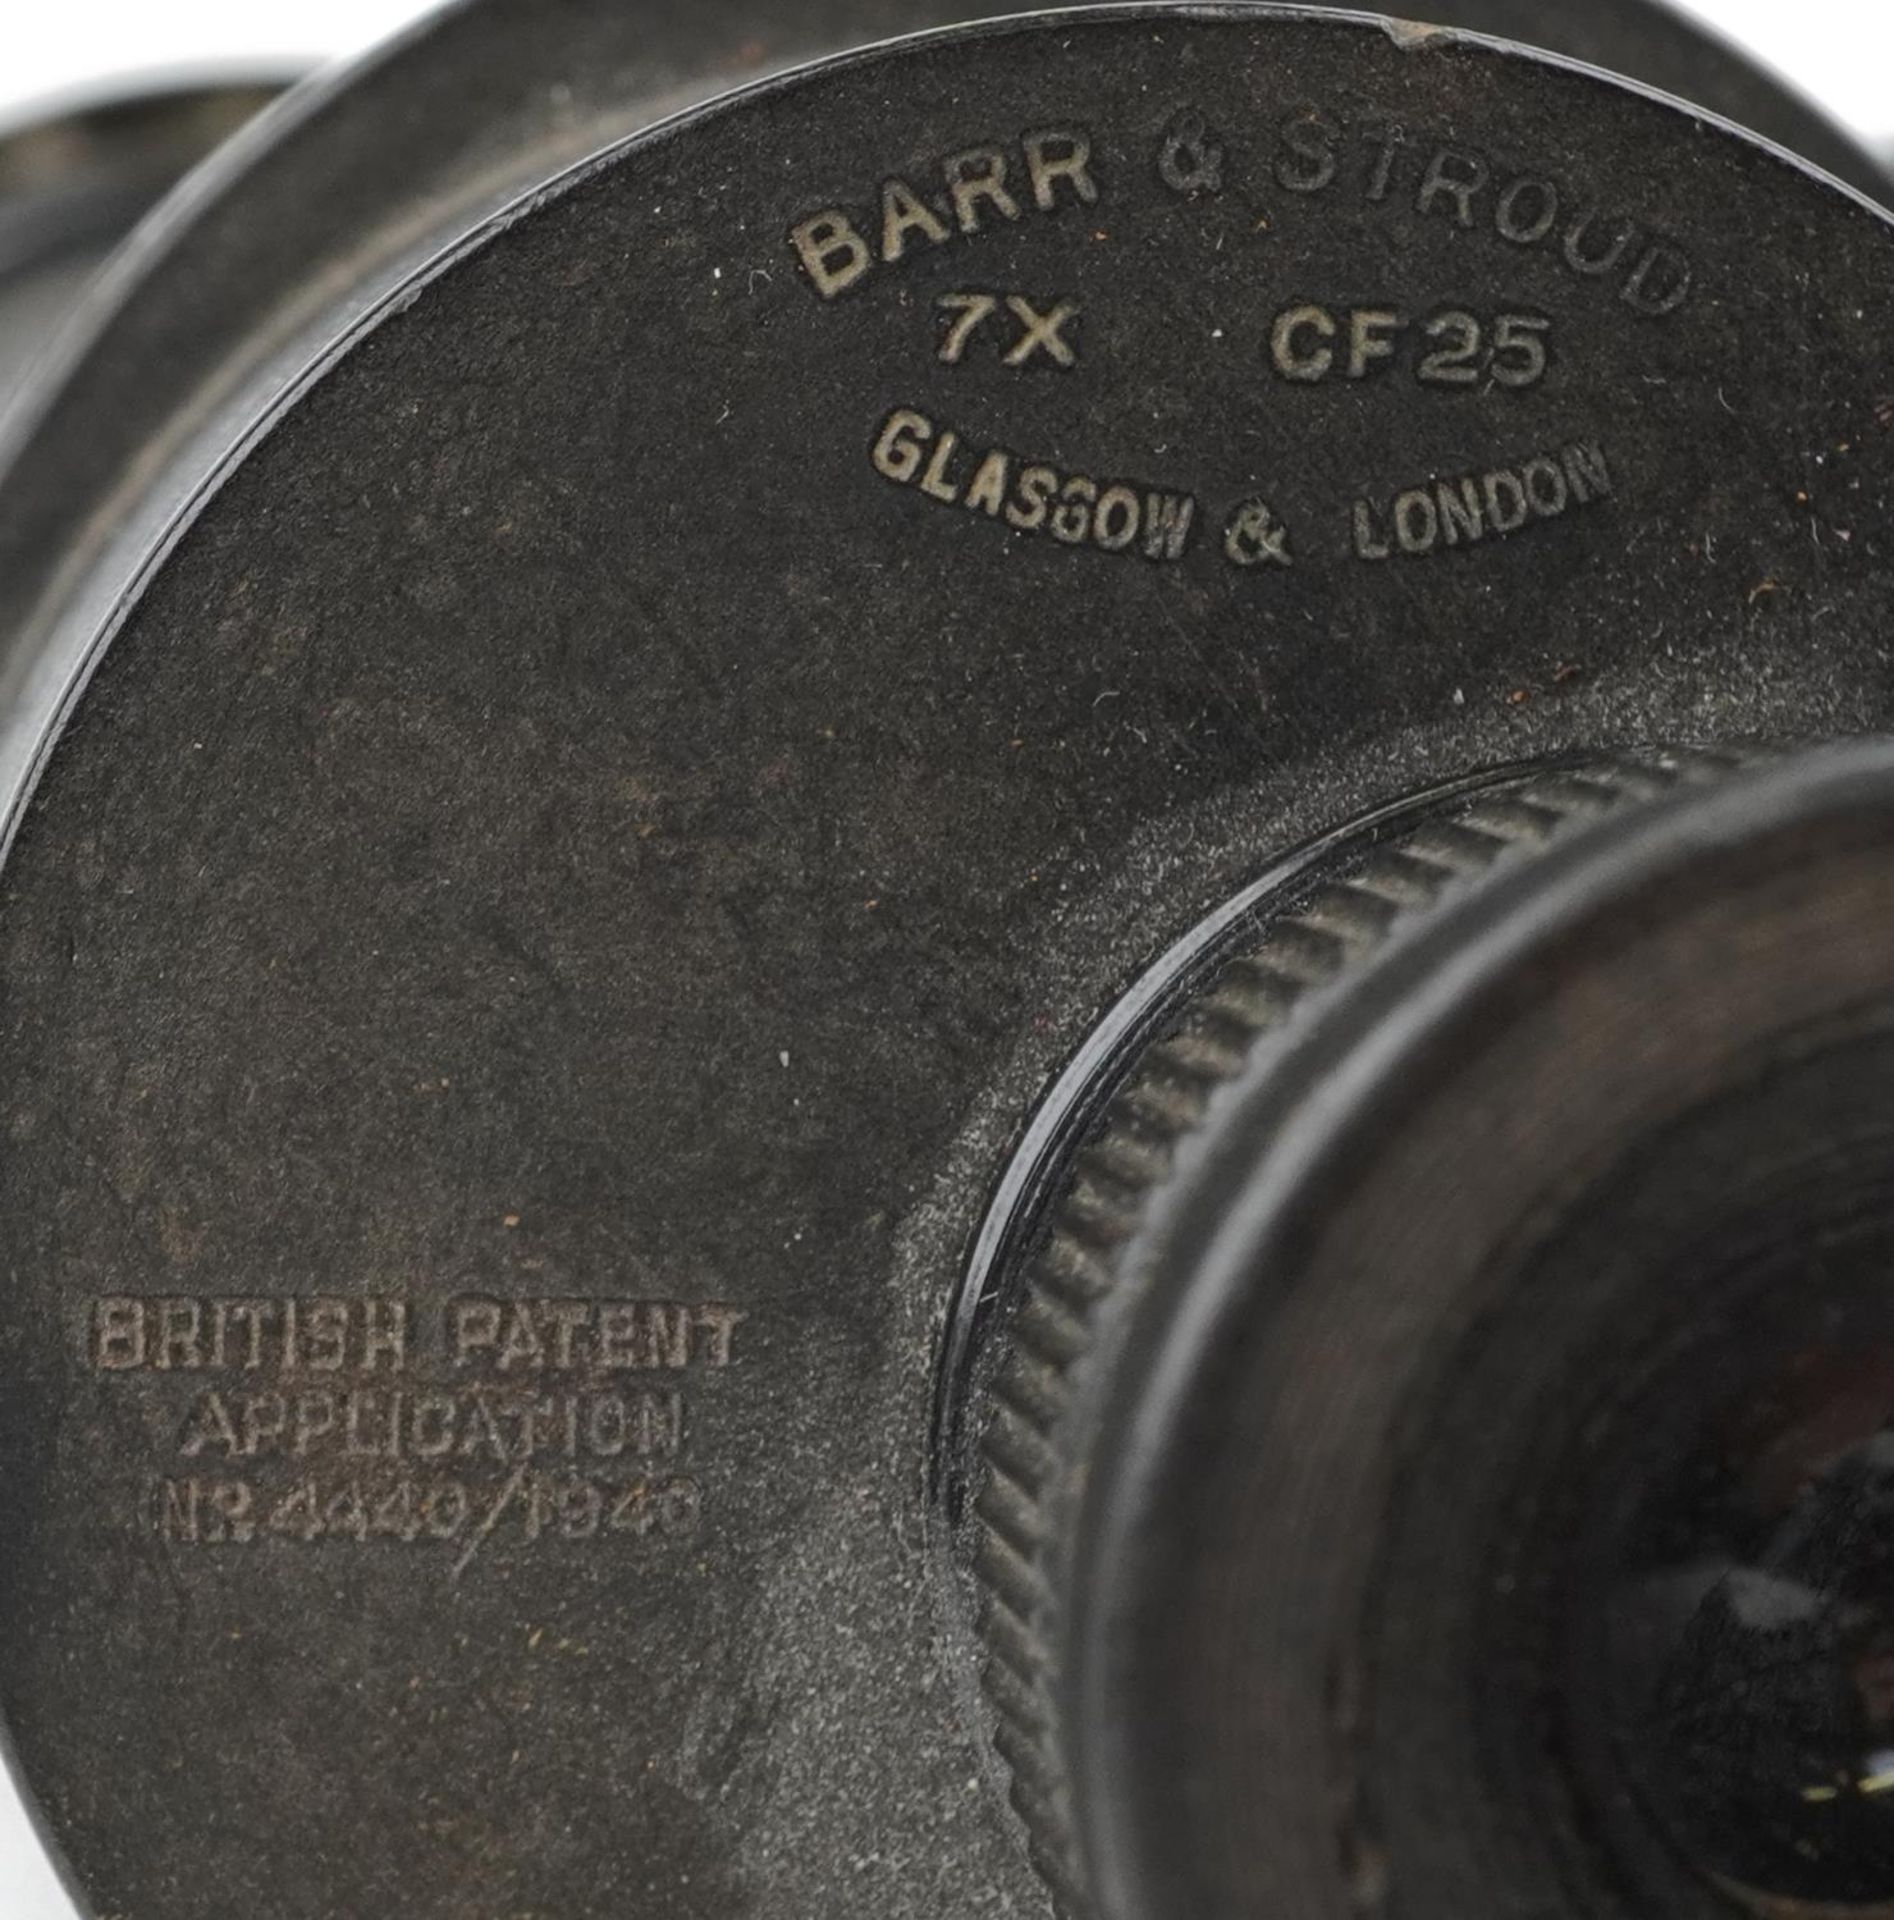 Barr & Stroud, pair of military issue 7 x binoculars with leather case numbered 1949, serial - Bild 4 aus 4